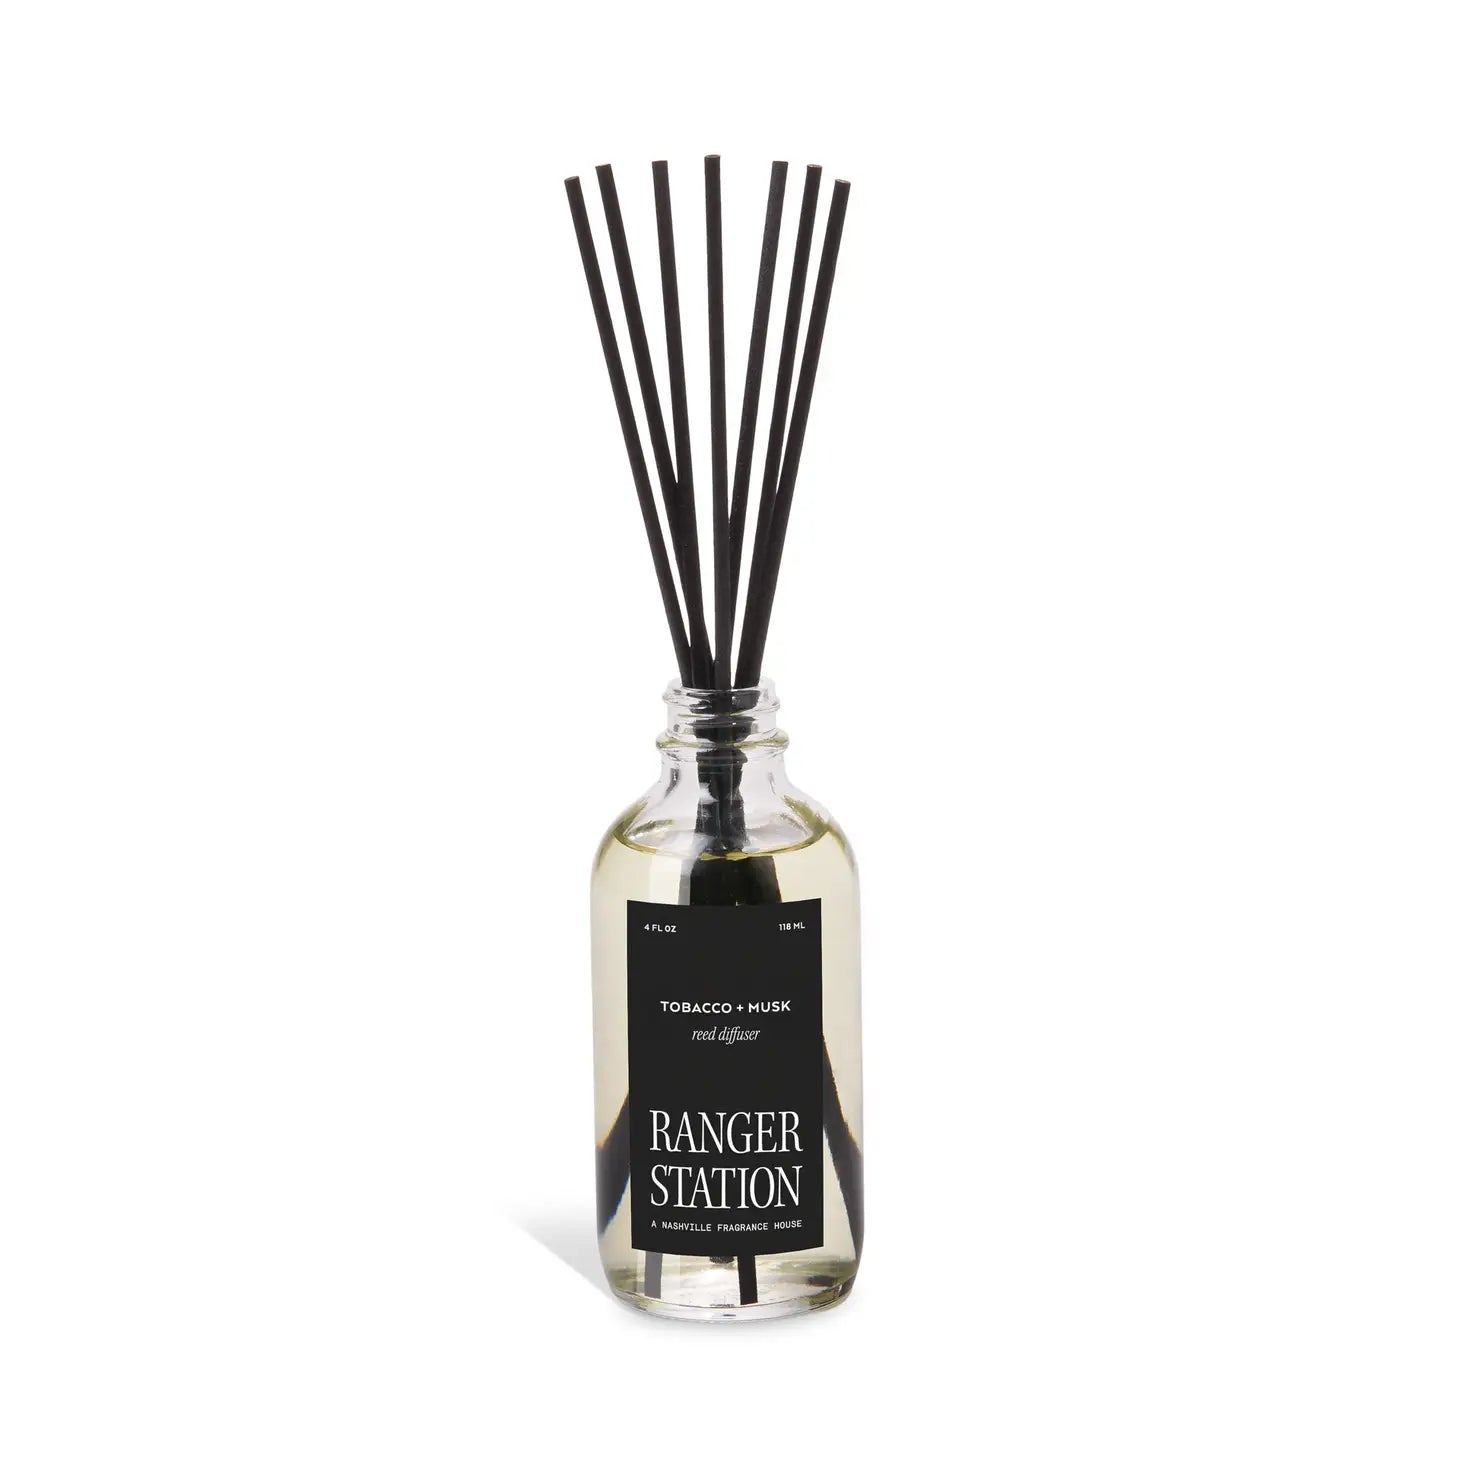 Tobacco + Musk Reed Diffuser by Ranger Station